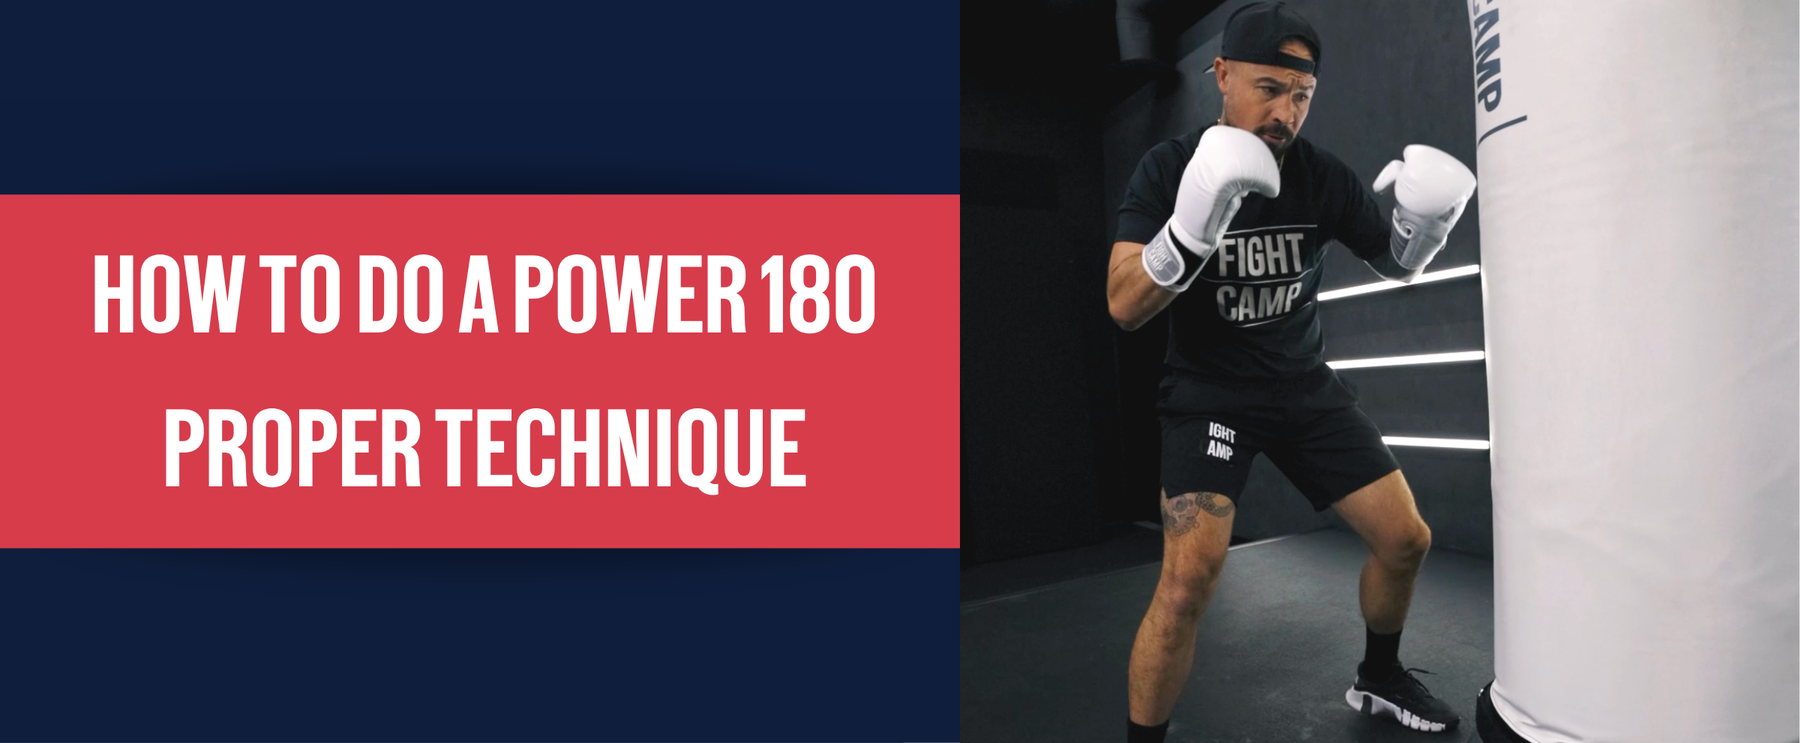 How To Do A Power 180 Boxing Drill | Proper Technique